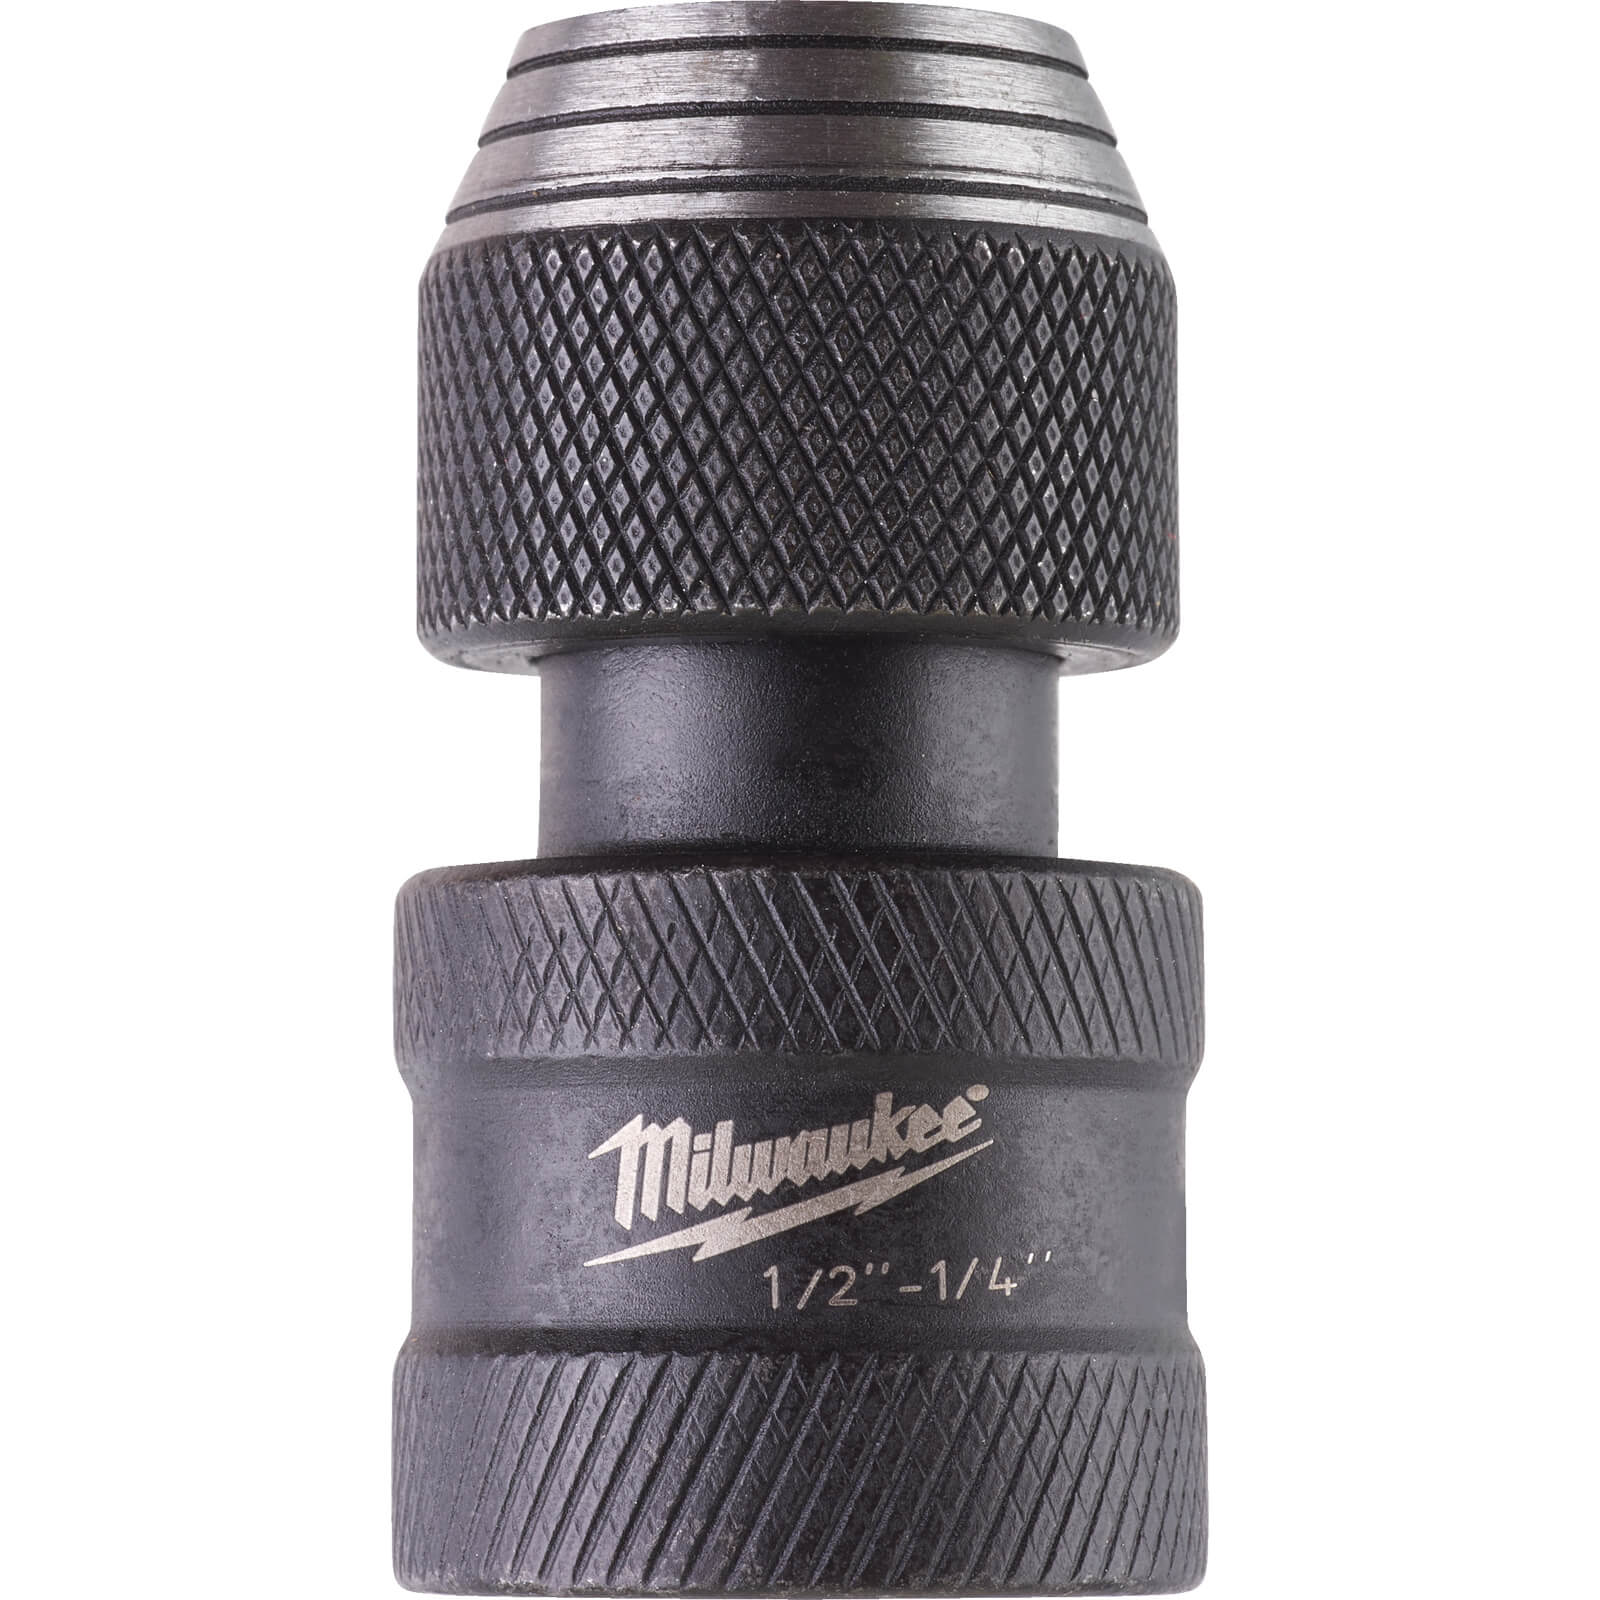 Image of Milwaukee Shockwave 1/2 Square Drive to 1/4 Hex Impact Adaptor 1/2"